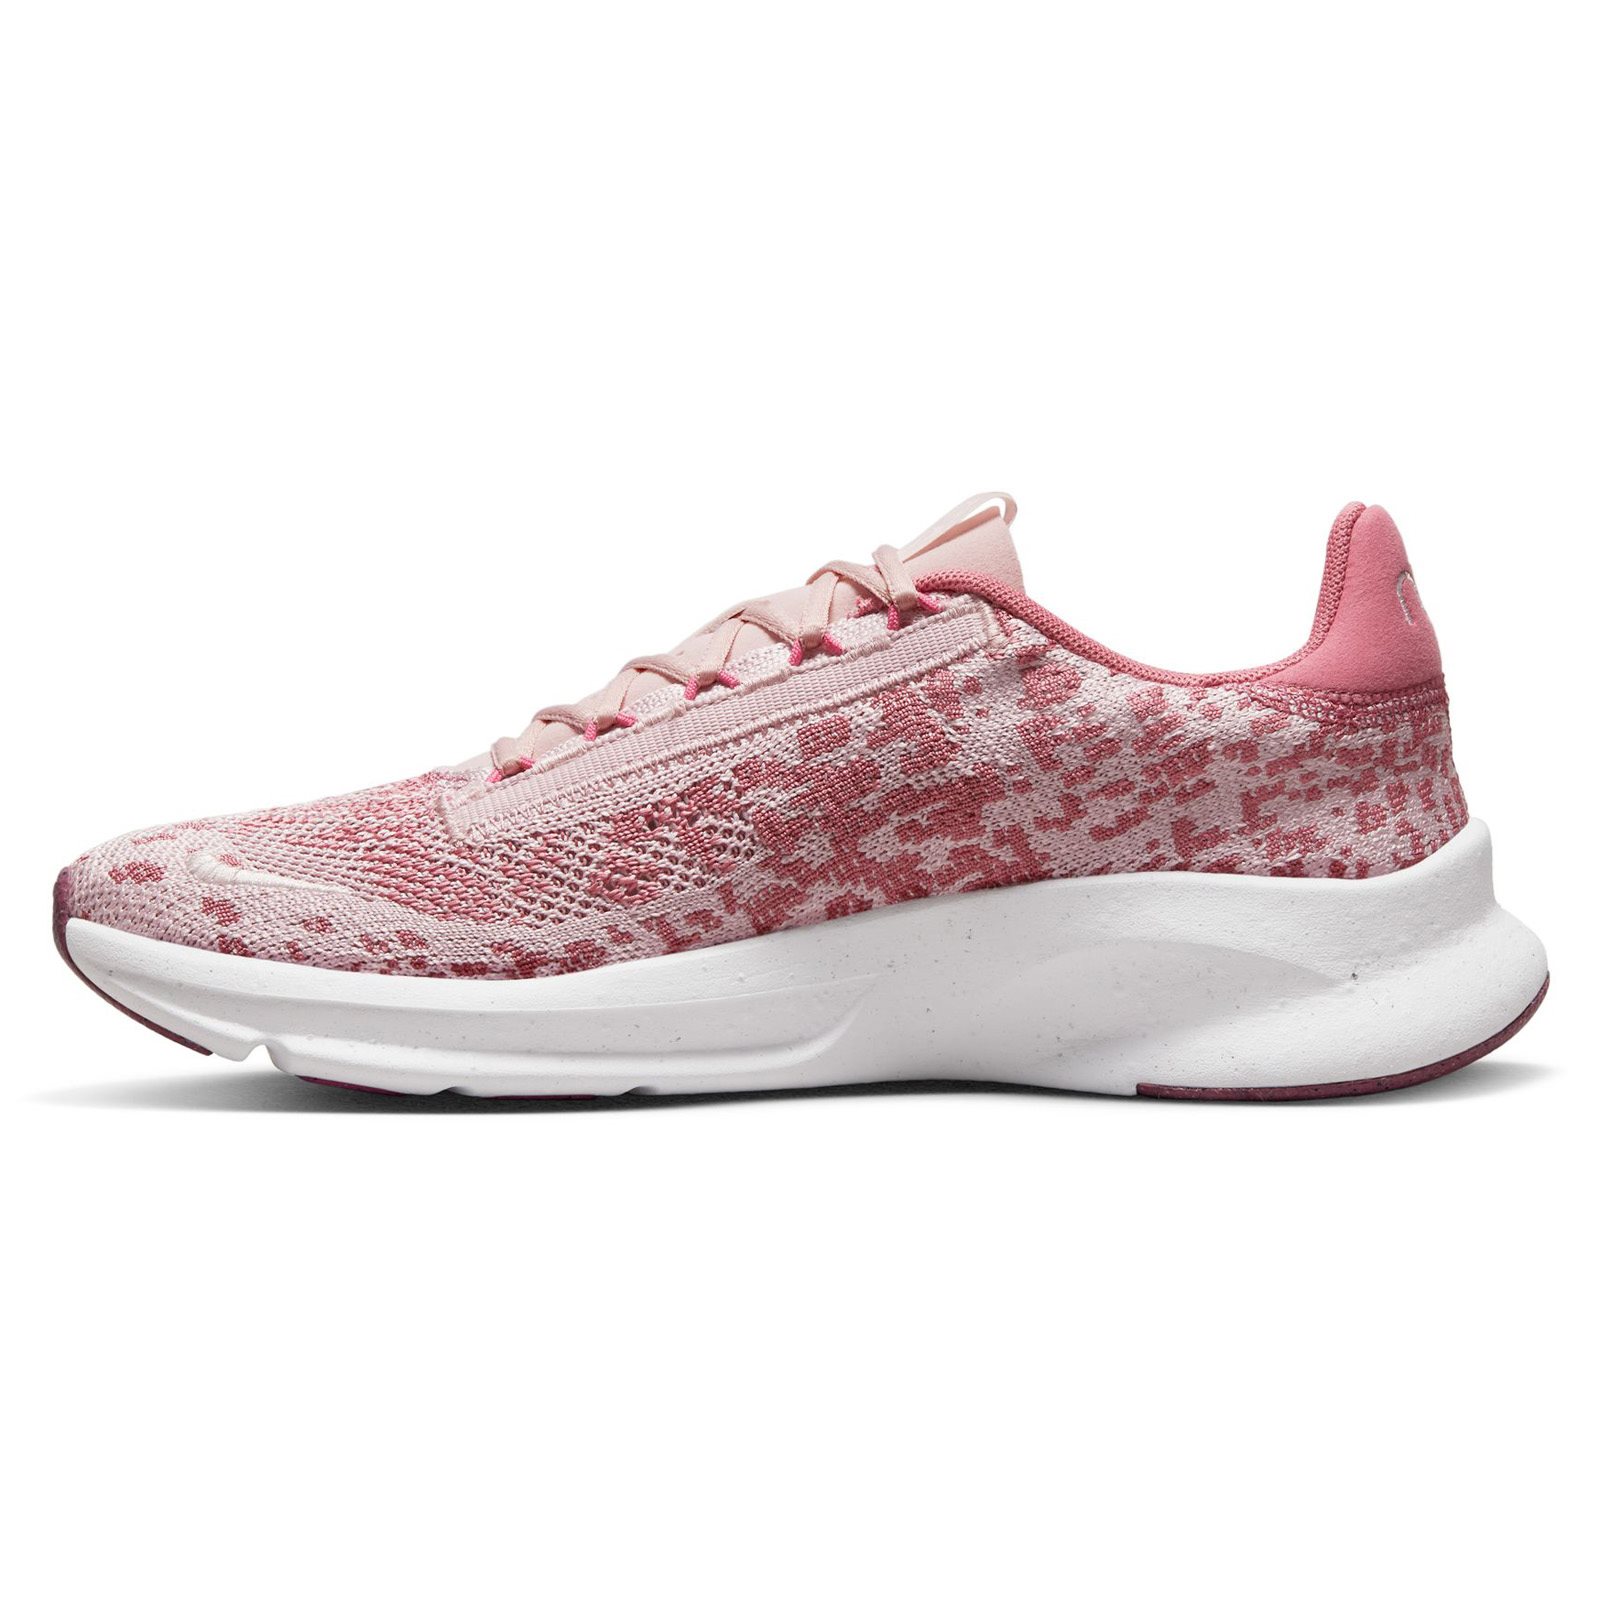 NIKE SUPERREP GO 3 FLYKNIT WOMENS TRAINING SHOES